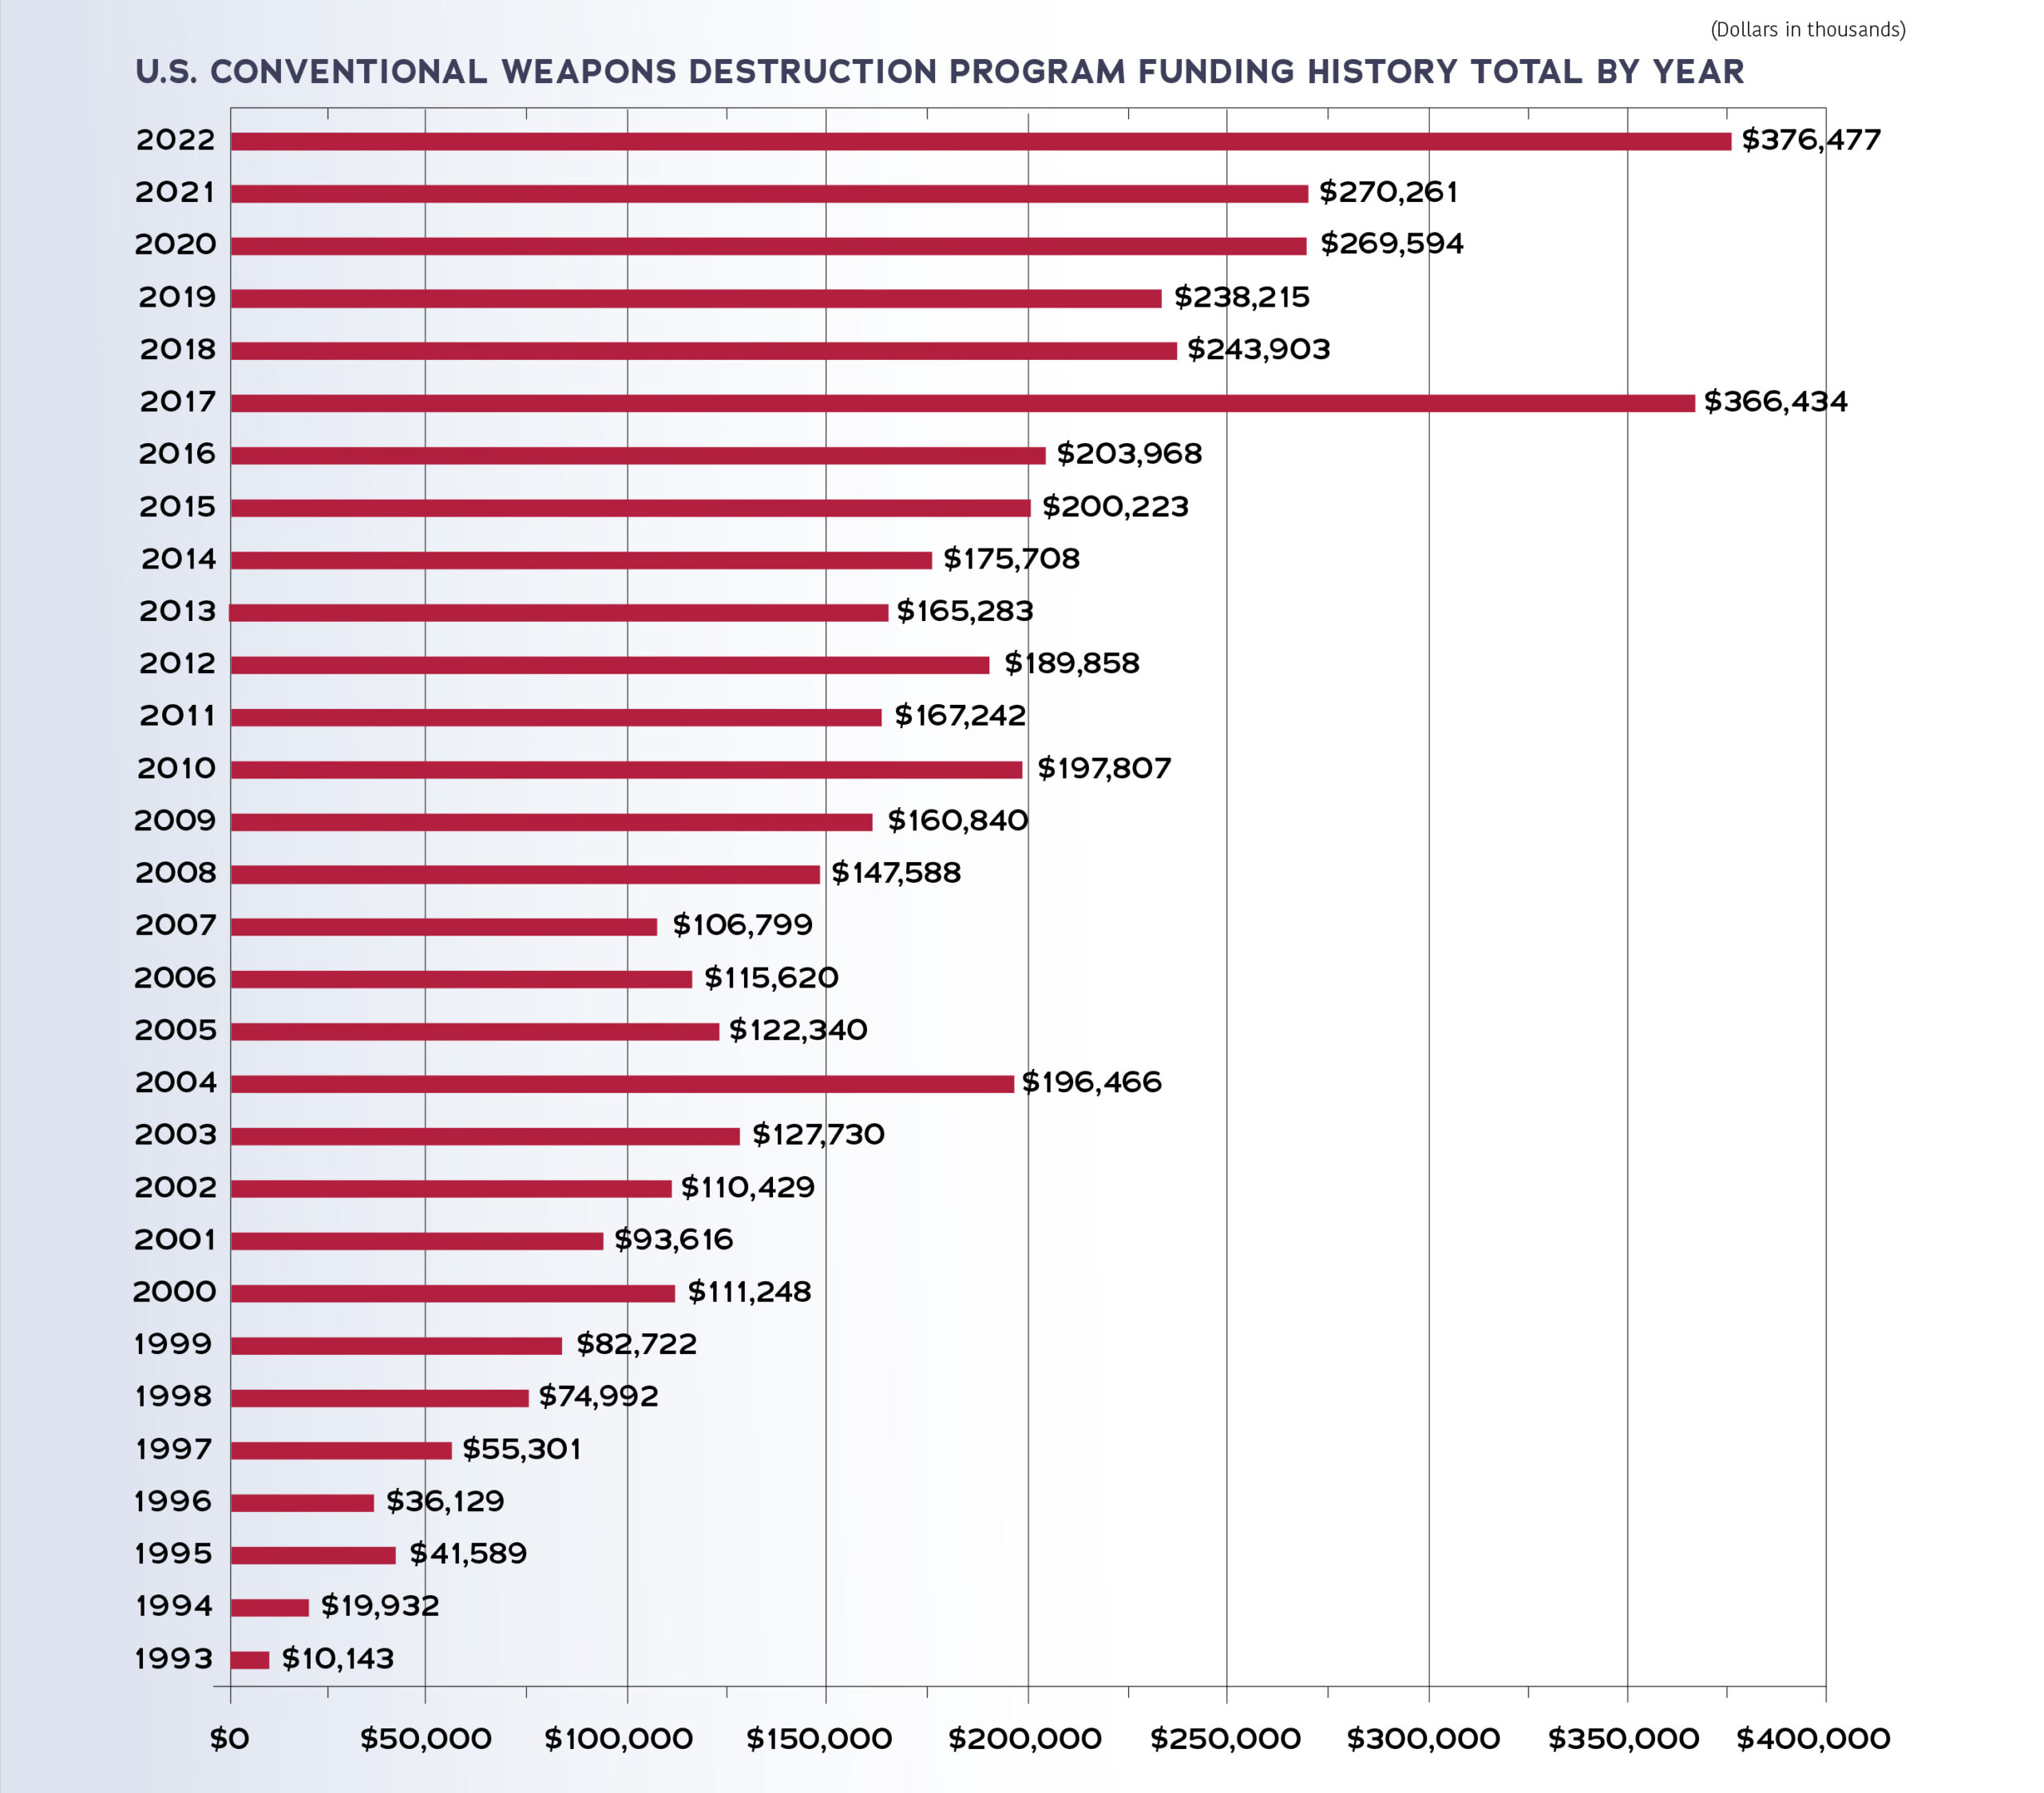 U.S. Conventional Weapons Destruction Program Funding History Total by Year